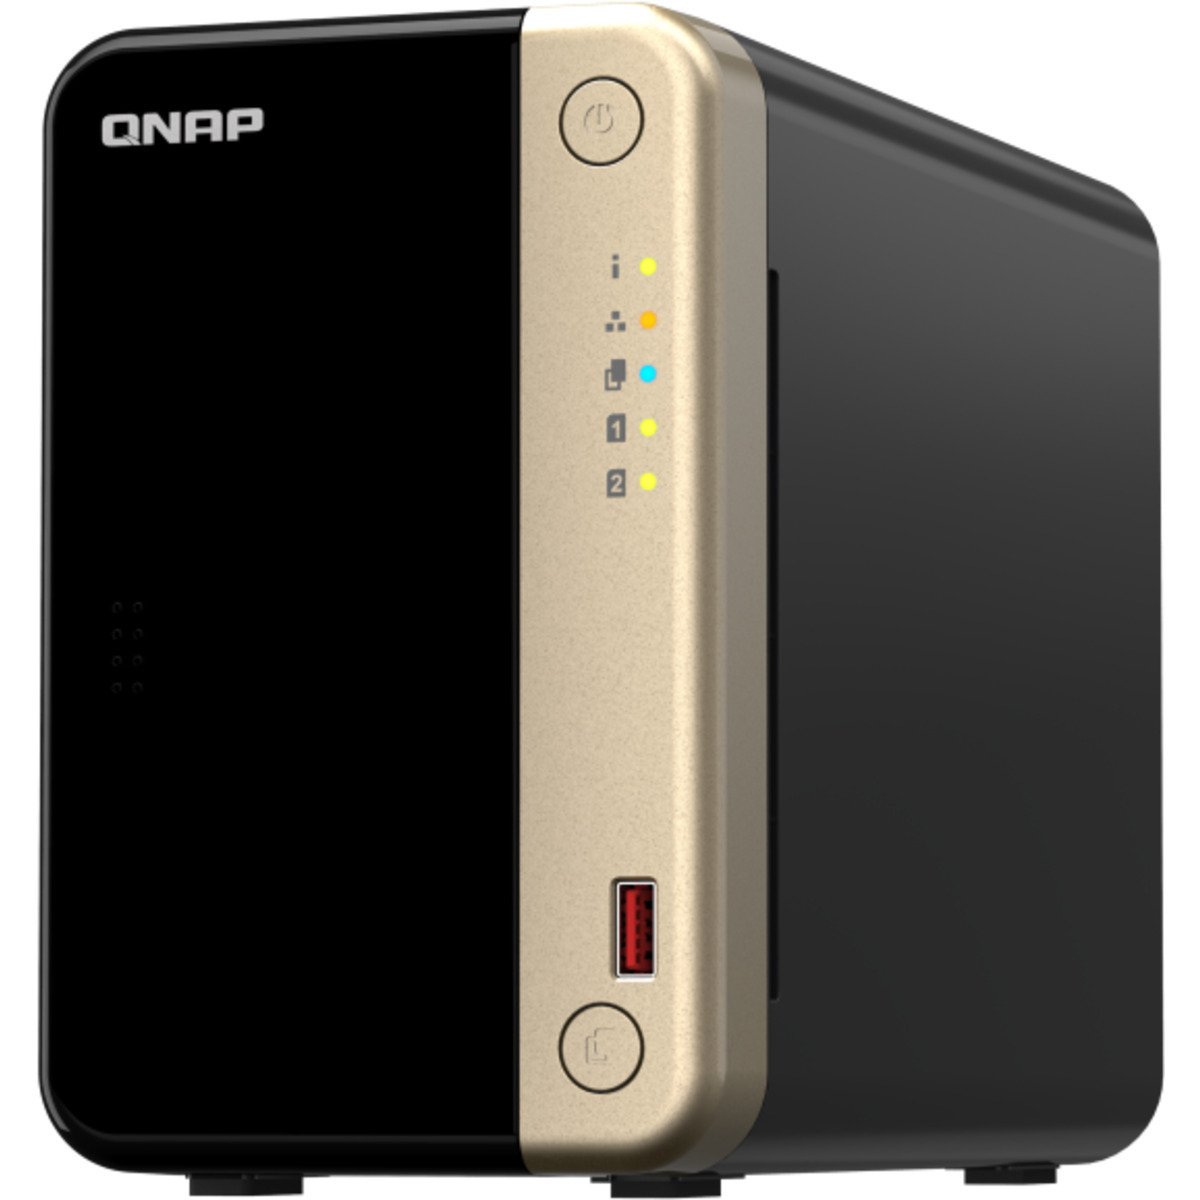 QNAP TS-264 20tb 2-Bay Desktop Multimedia / Power User / Business NAS - Network Attached Storage Device 2x10tb Seagate EXOS X18 ST10000NM018G 3.5 7200rpm SATA 6Gb/s HDD ENTERPRISE Class Drives Installed - Burn-In Tested - ON SALE TS-264